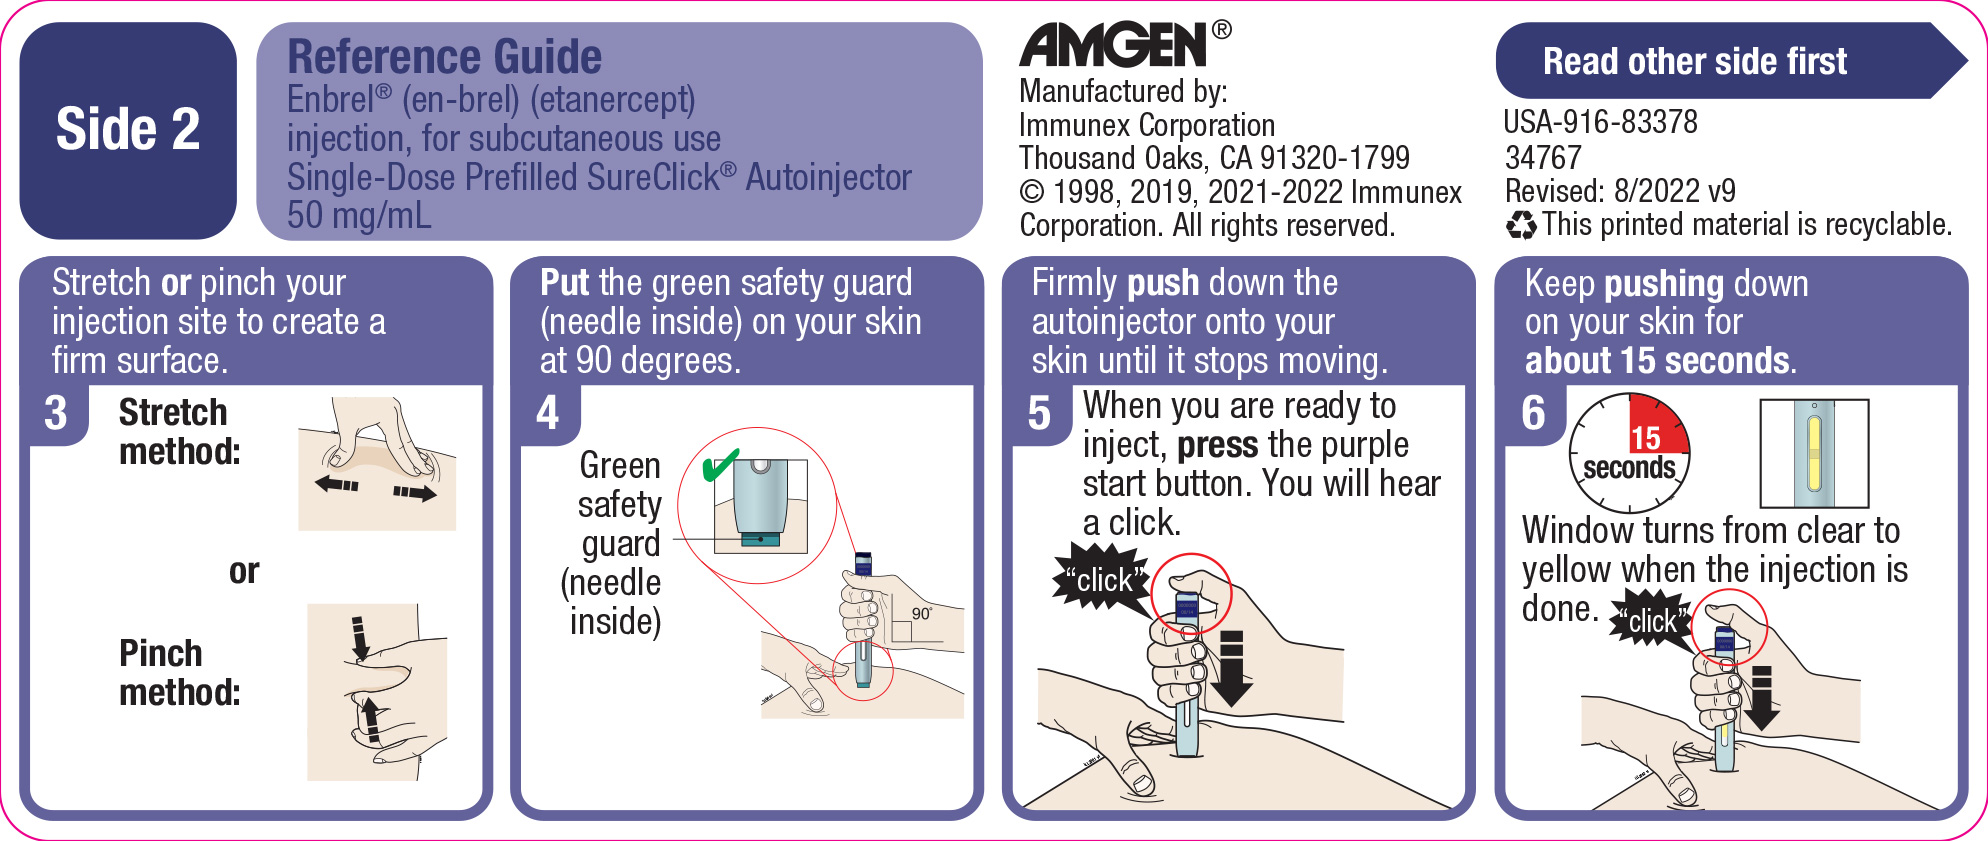 Side 2 of the SureClick® Autoinjector quick reference guide with continued injection instructions.
Please read all instructions in carton before use